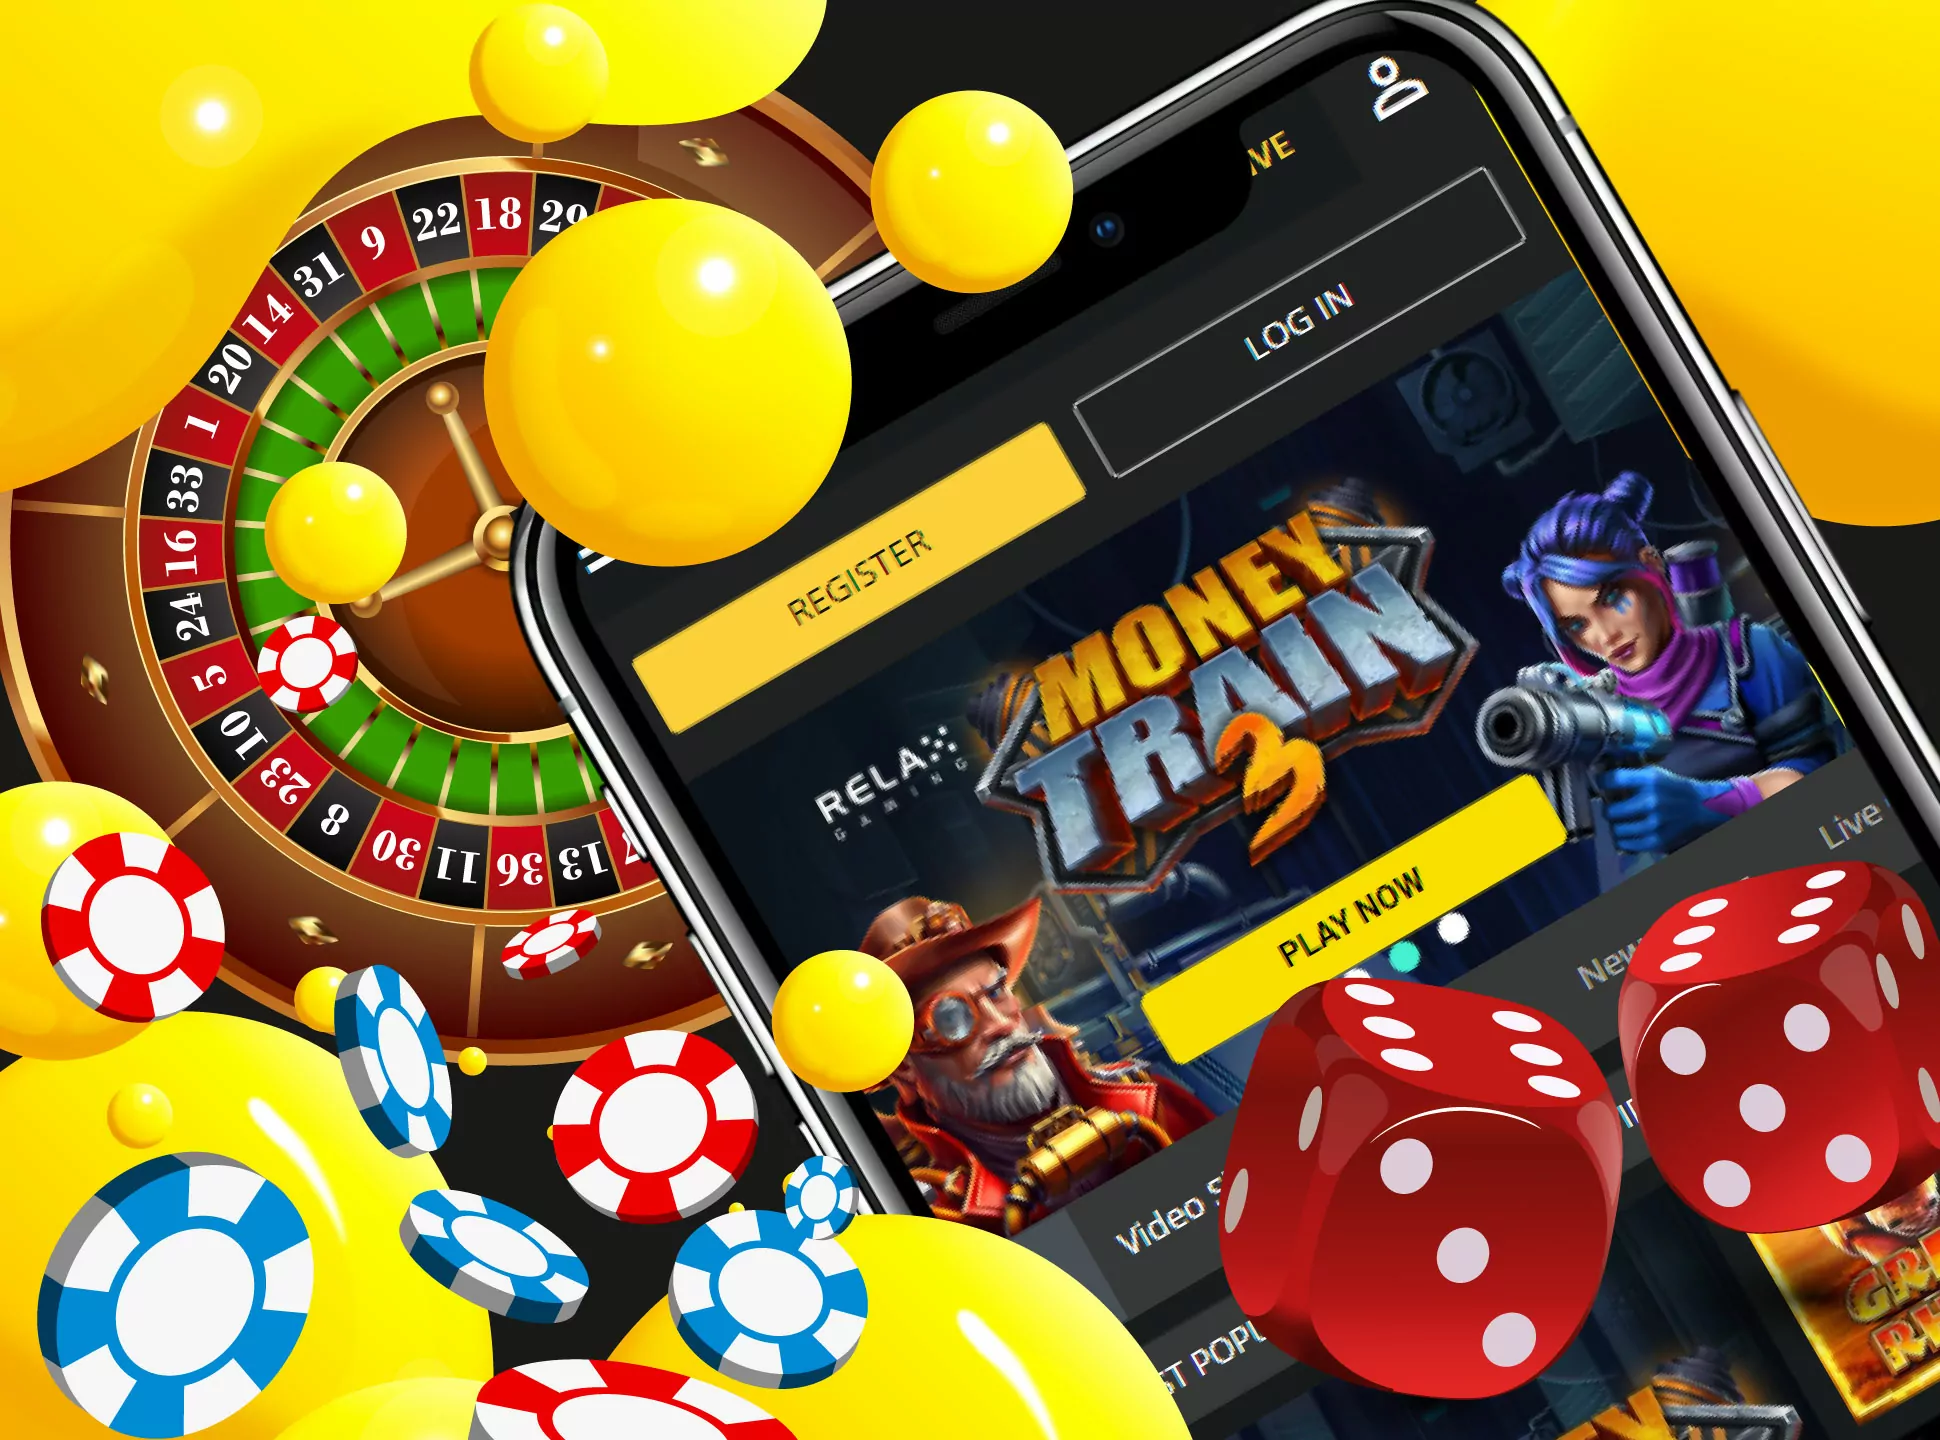 You will find hundreds of games from the trustworthy game providers in the Betobet app.